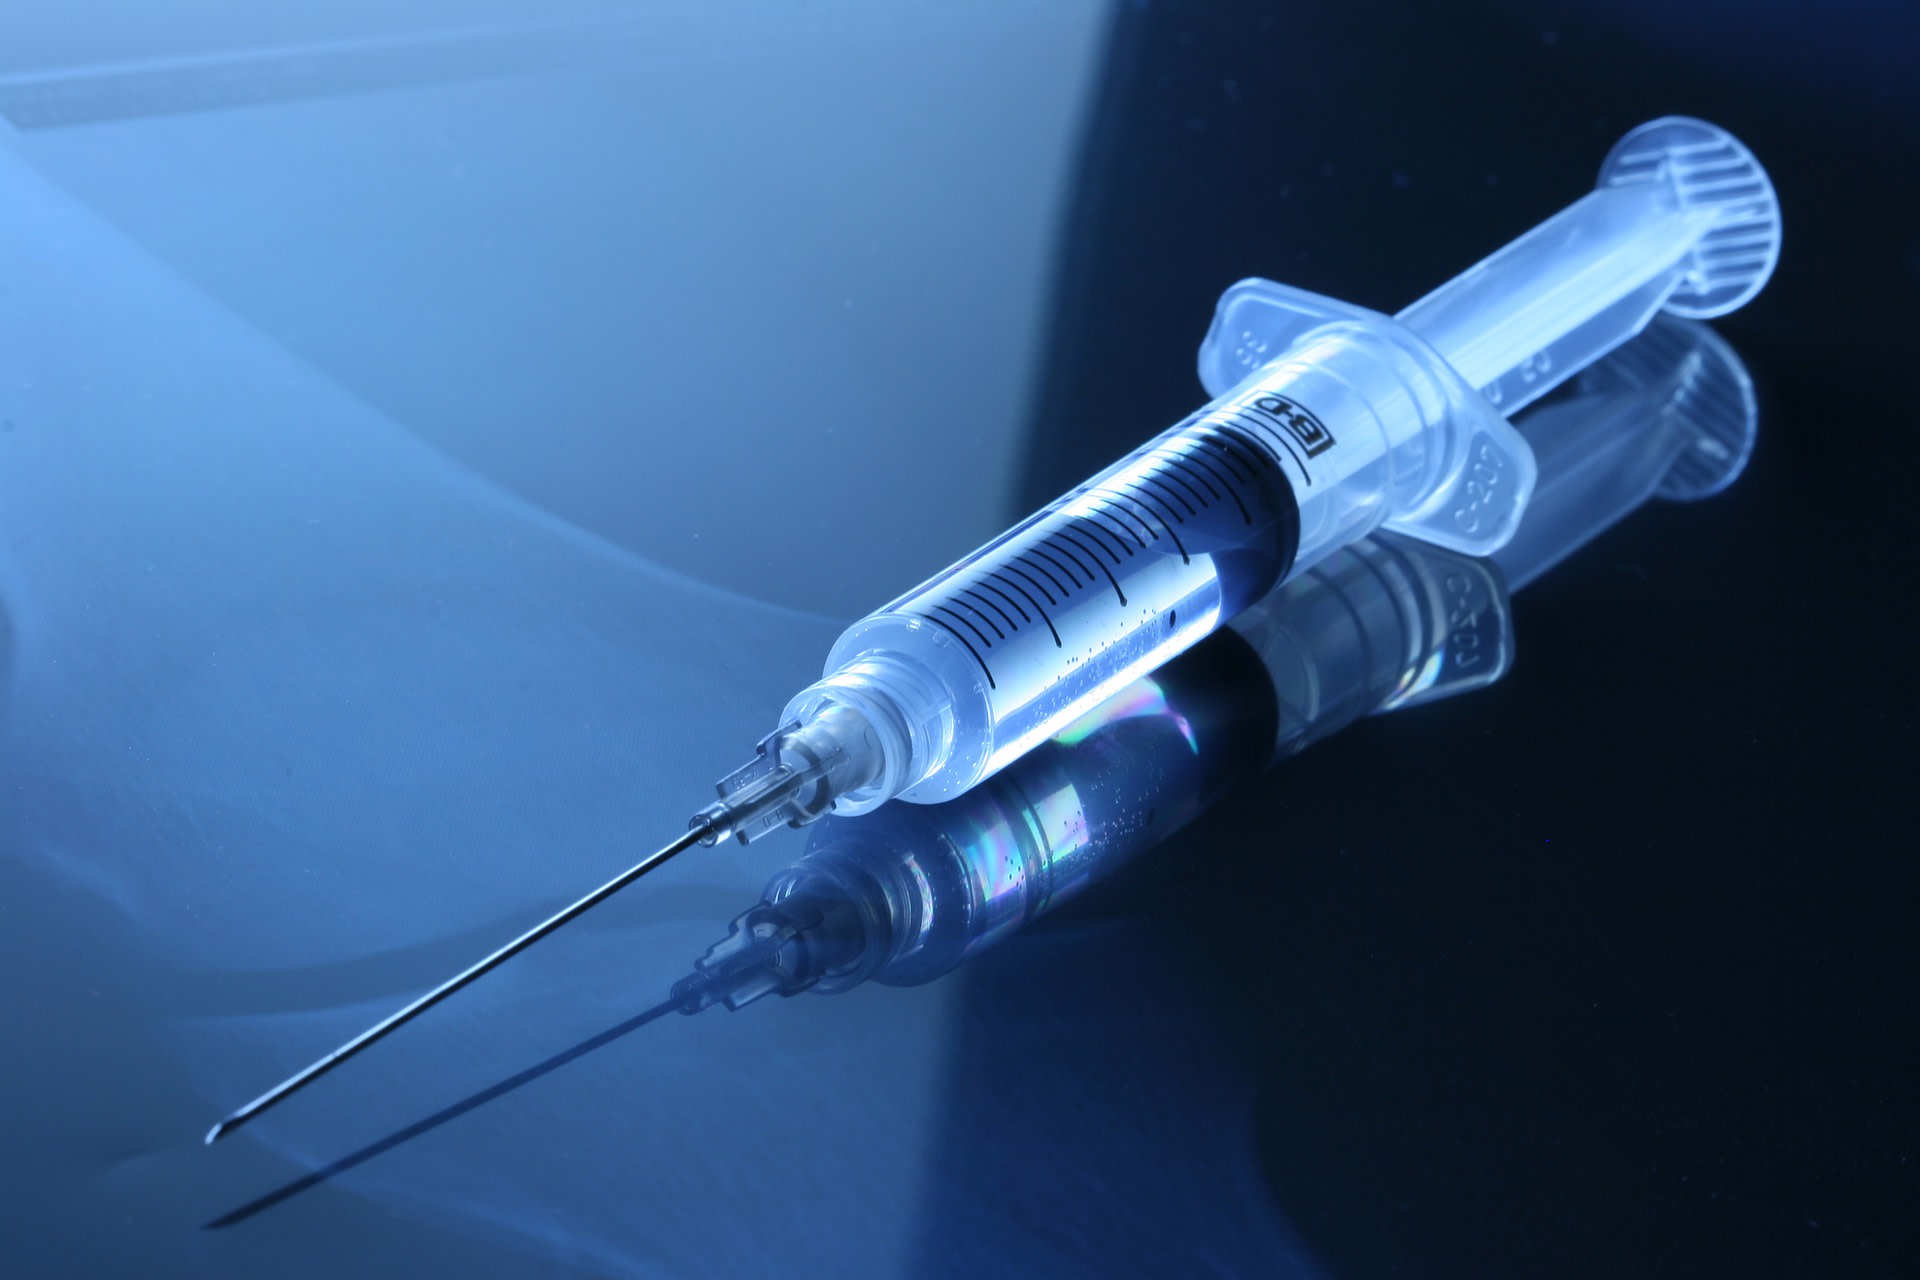 New York teacher arrested after injecting minor with what appeared to be Covid vaccine